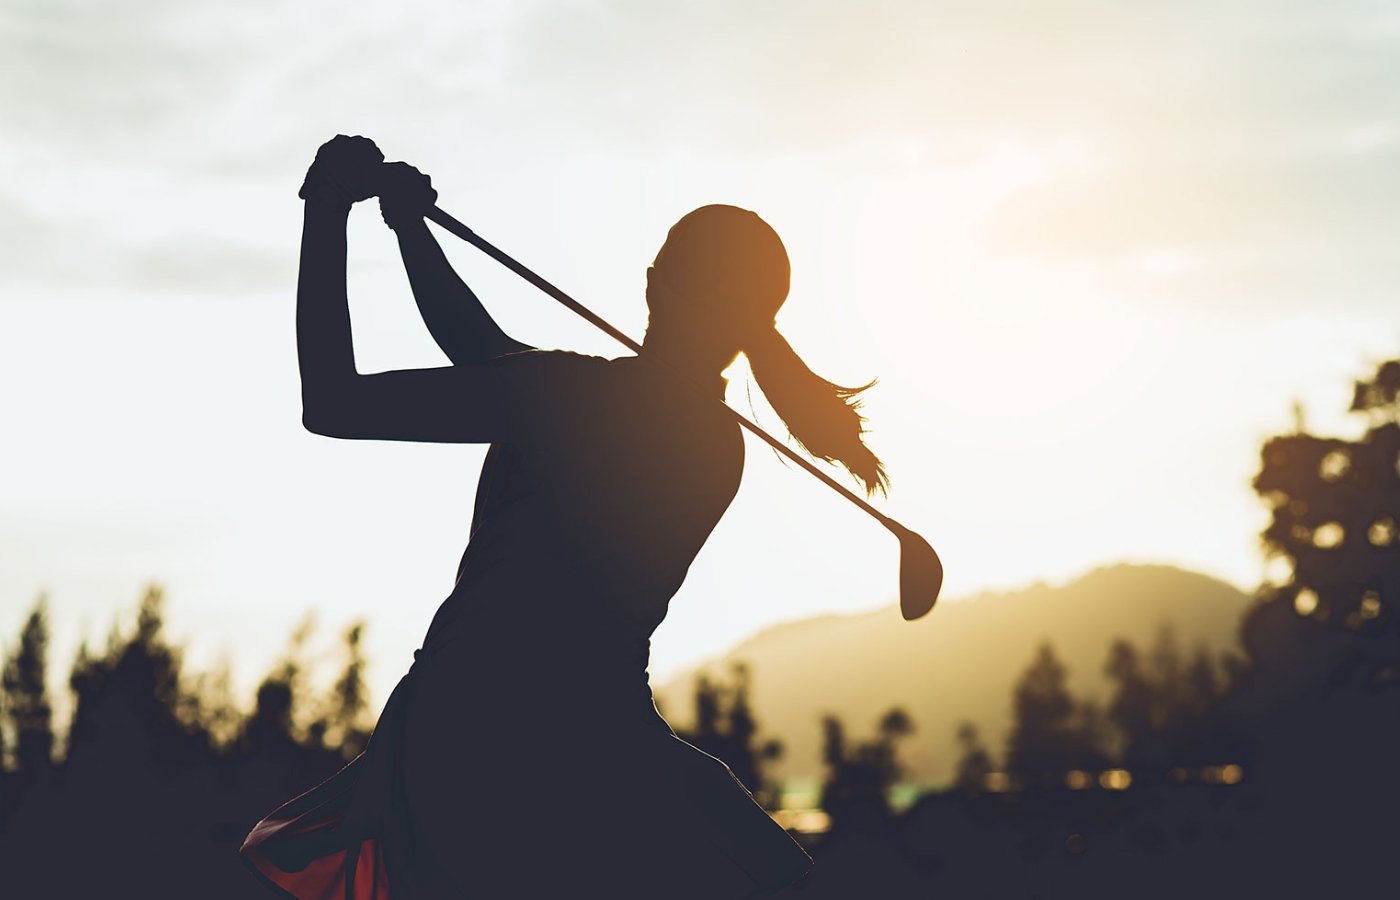 Women's Golf Dresses  Shop Golf Apparel, Clubs, and Gear in East